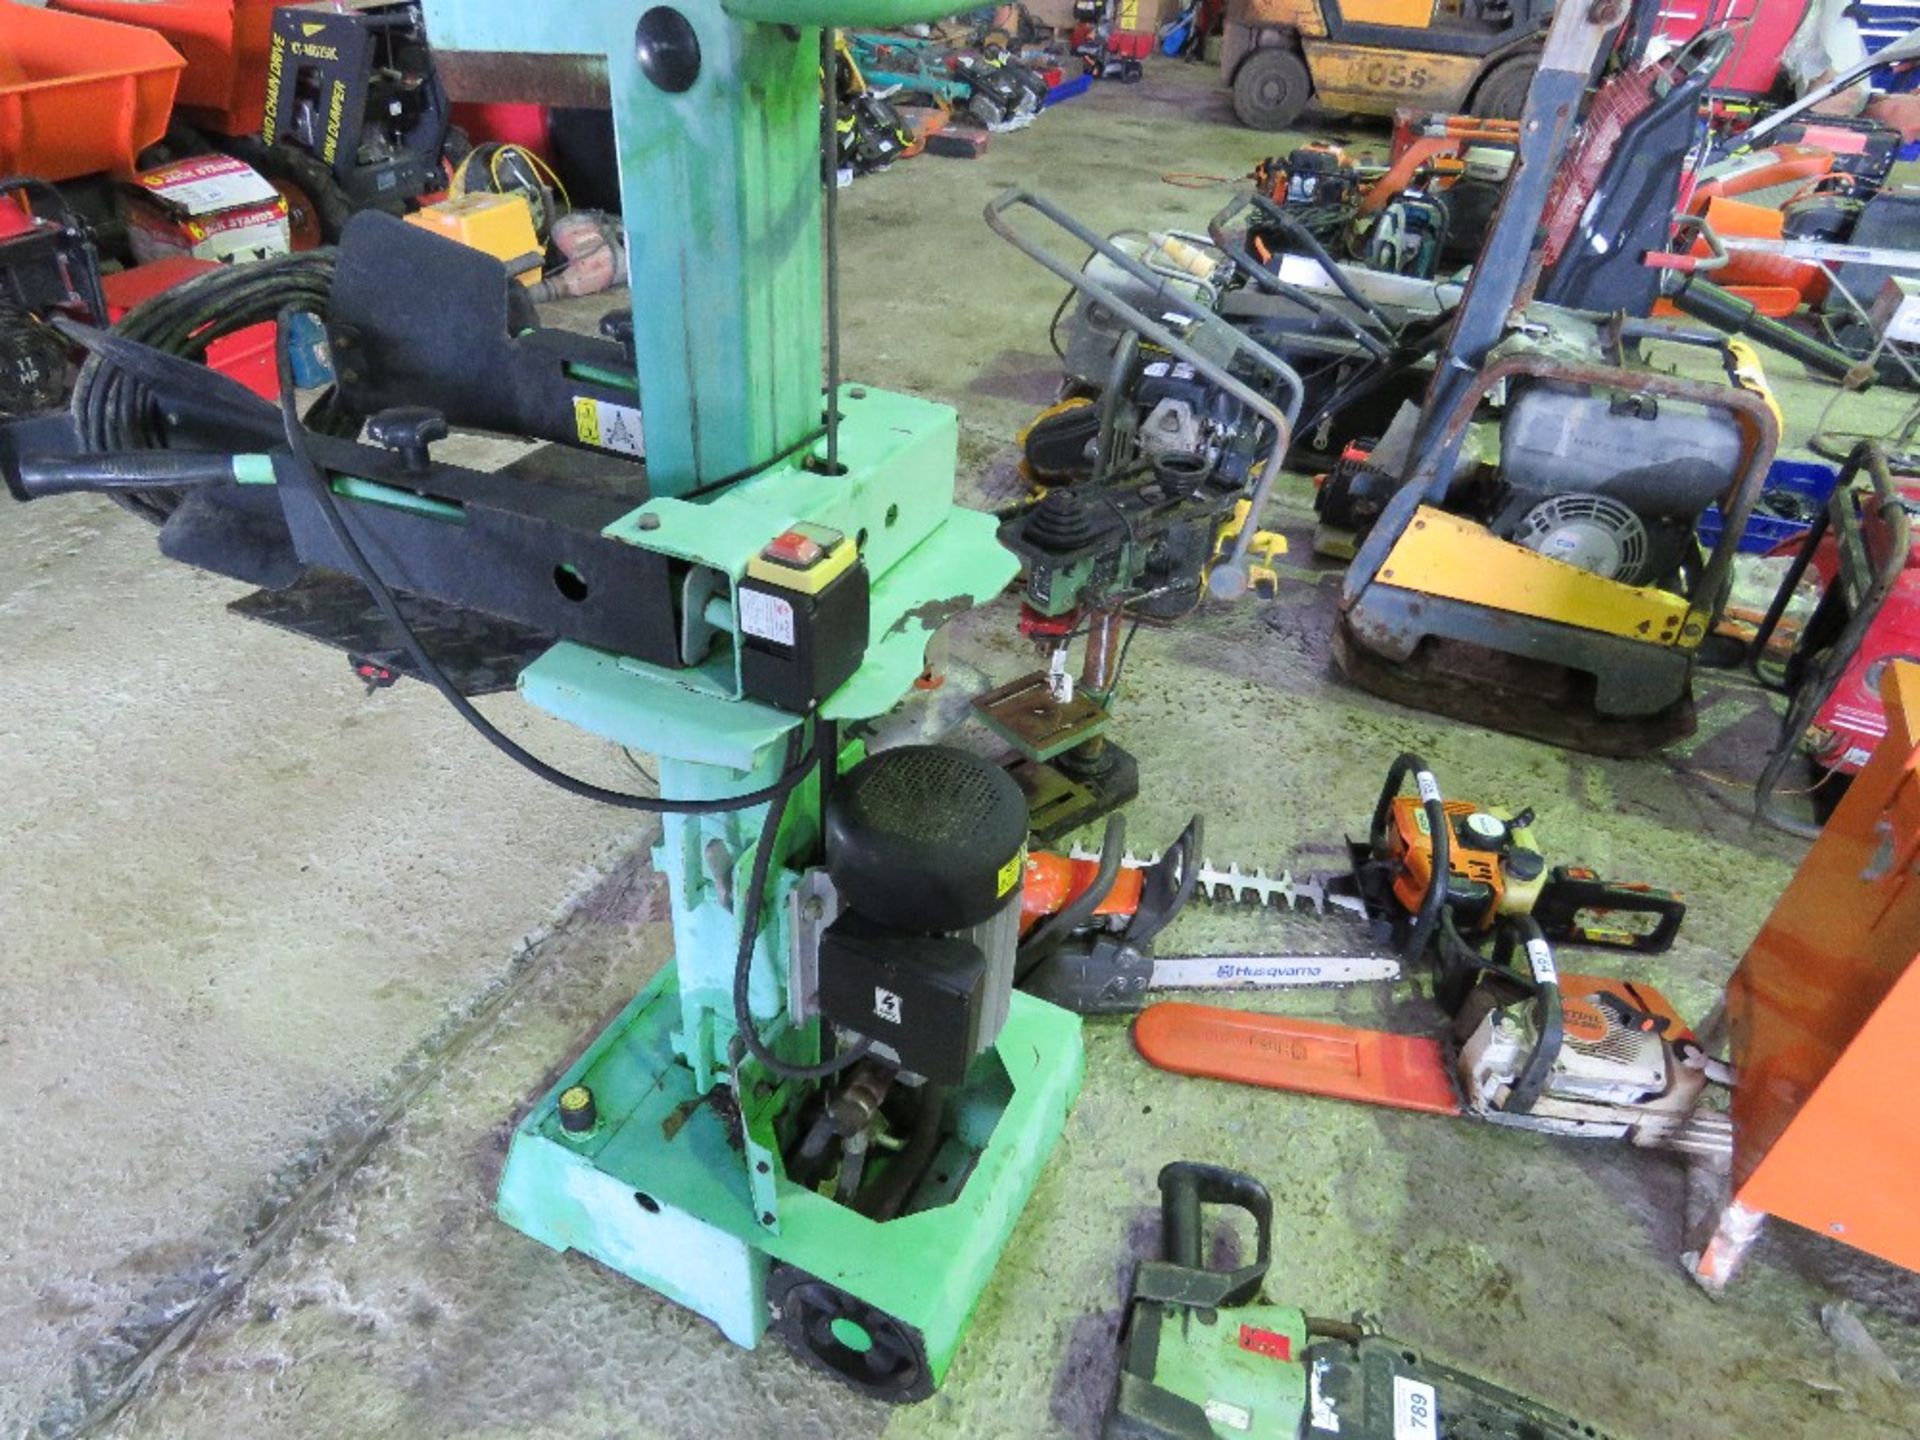 HANDYPRO 240VOLT POWERED UPRIGHT LOG SPLITTER, CONDITION UNKNOWN. THIS LOT IS SOLD UNDER THE AUCT - Image 5 of 5